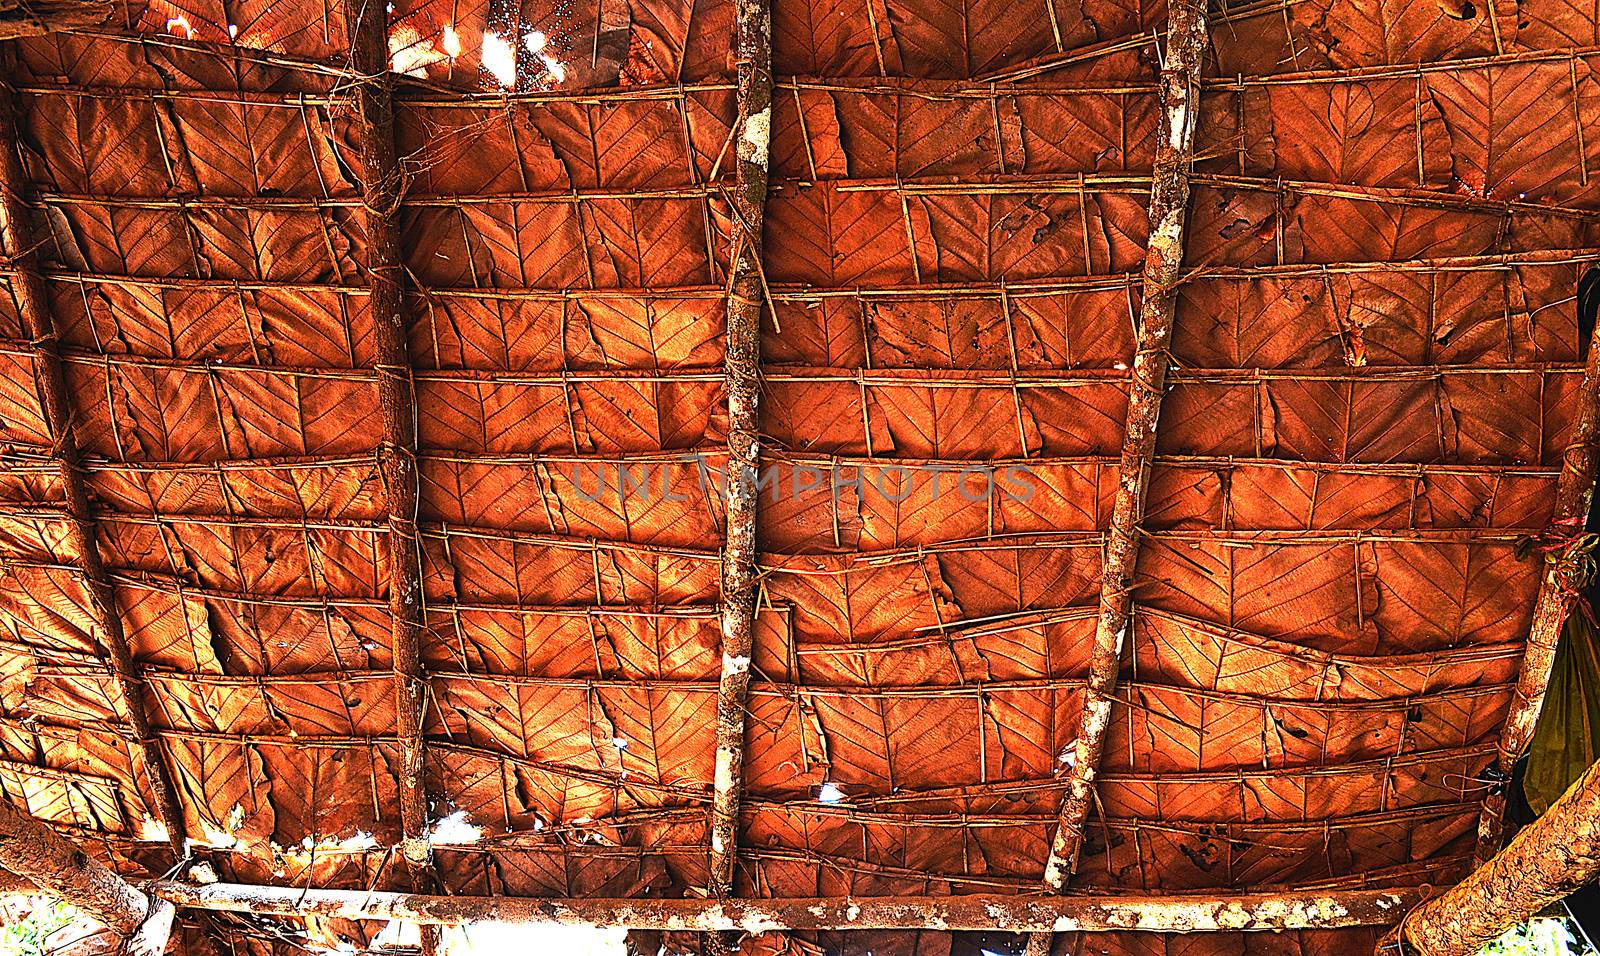 The Tile Roof made from Teak Leaf